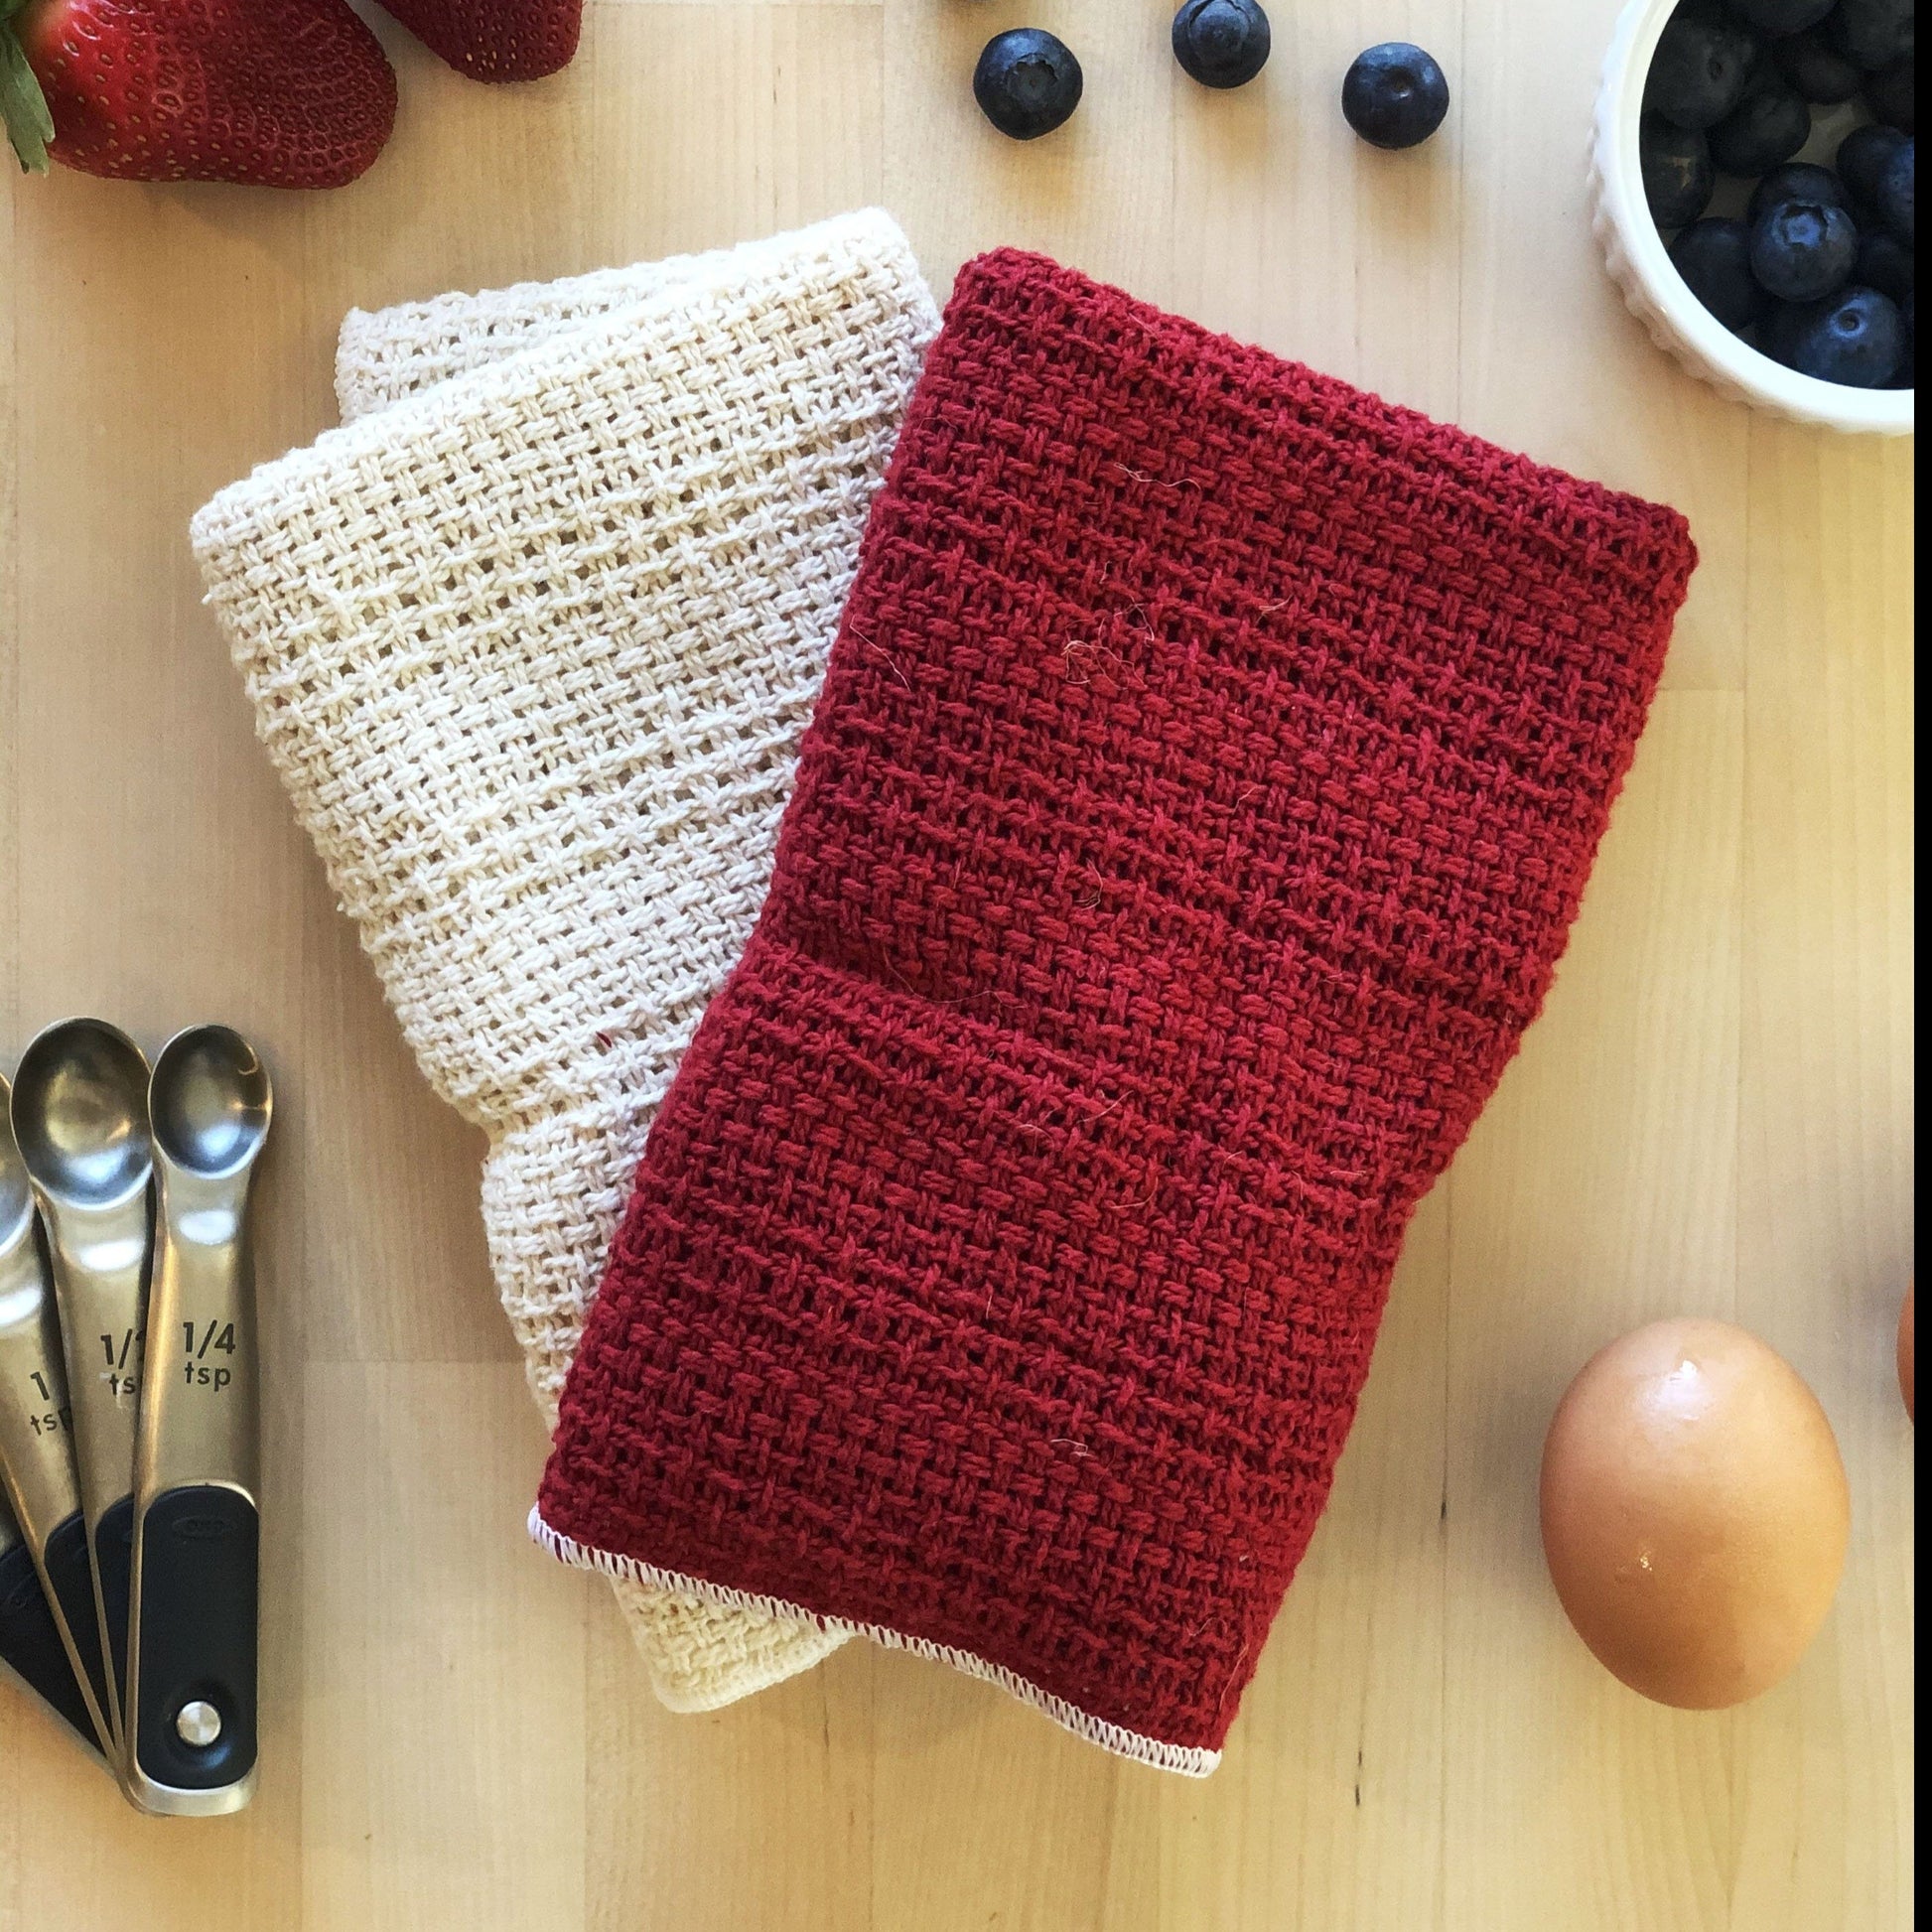 Made in the USA 100% Cotton Kitchen Towel - Set of 2 - American Made Kitchen Towels - American Home USA - Red and Natural